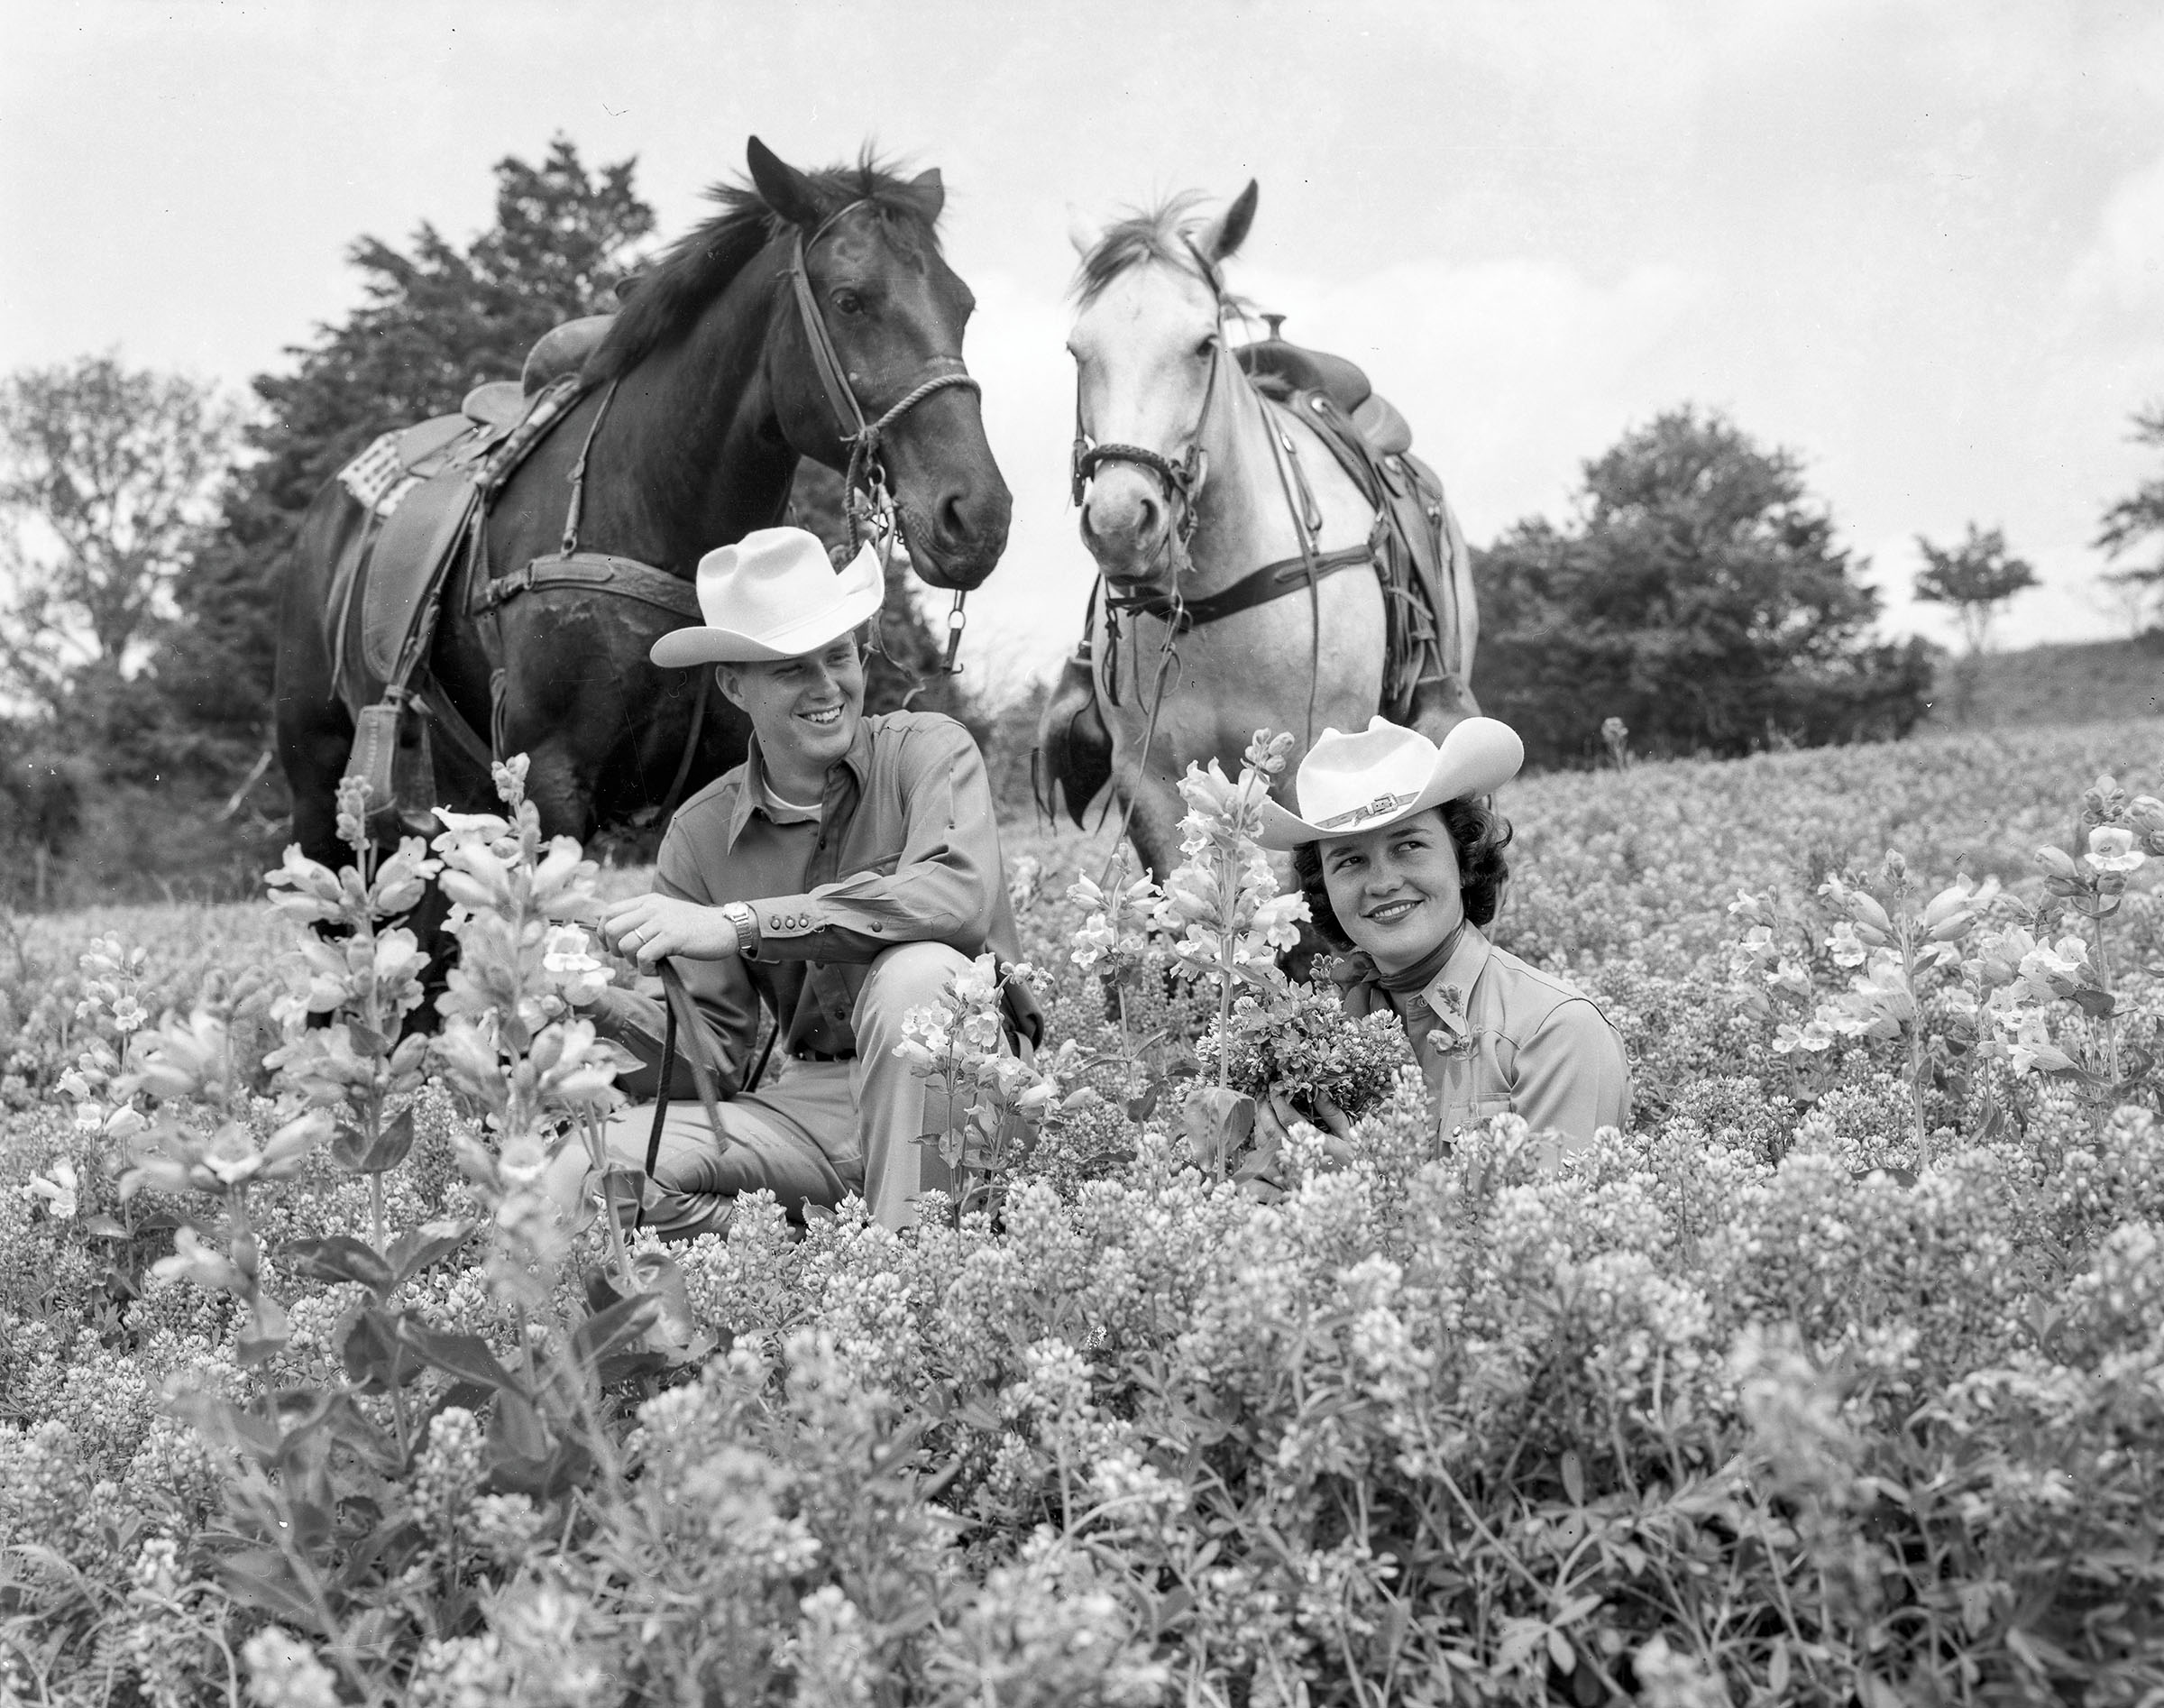 Two people sit in a field of bluebonnets in front of horses